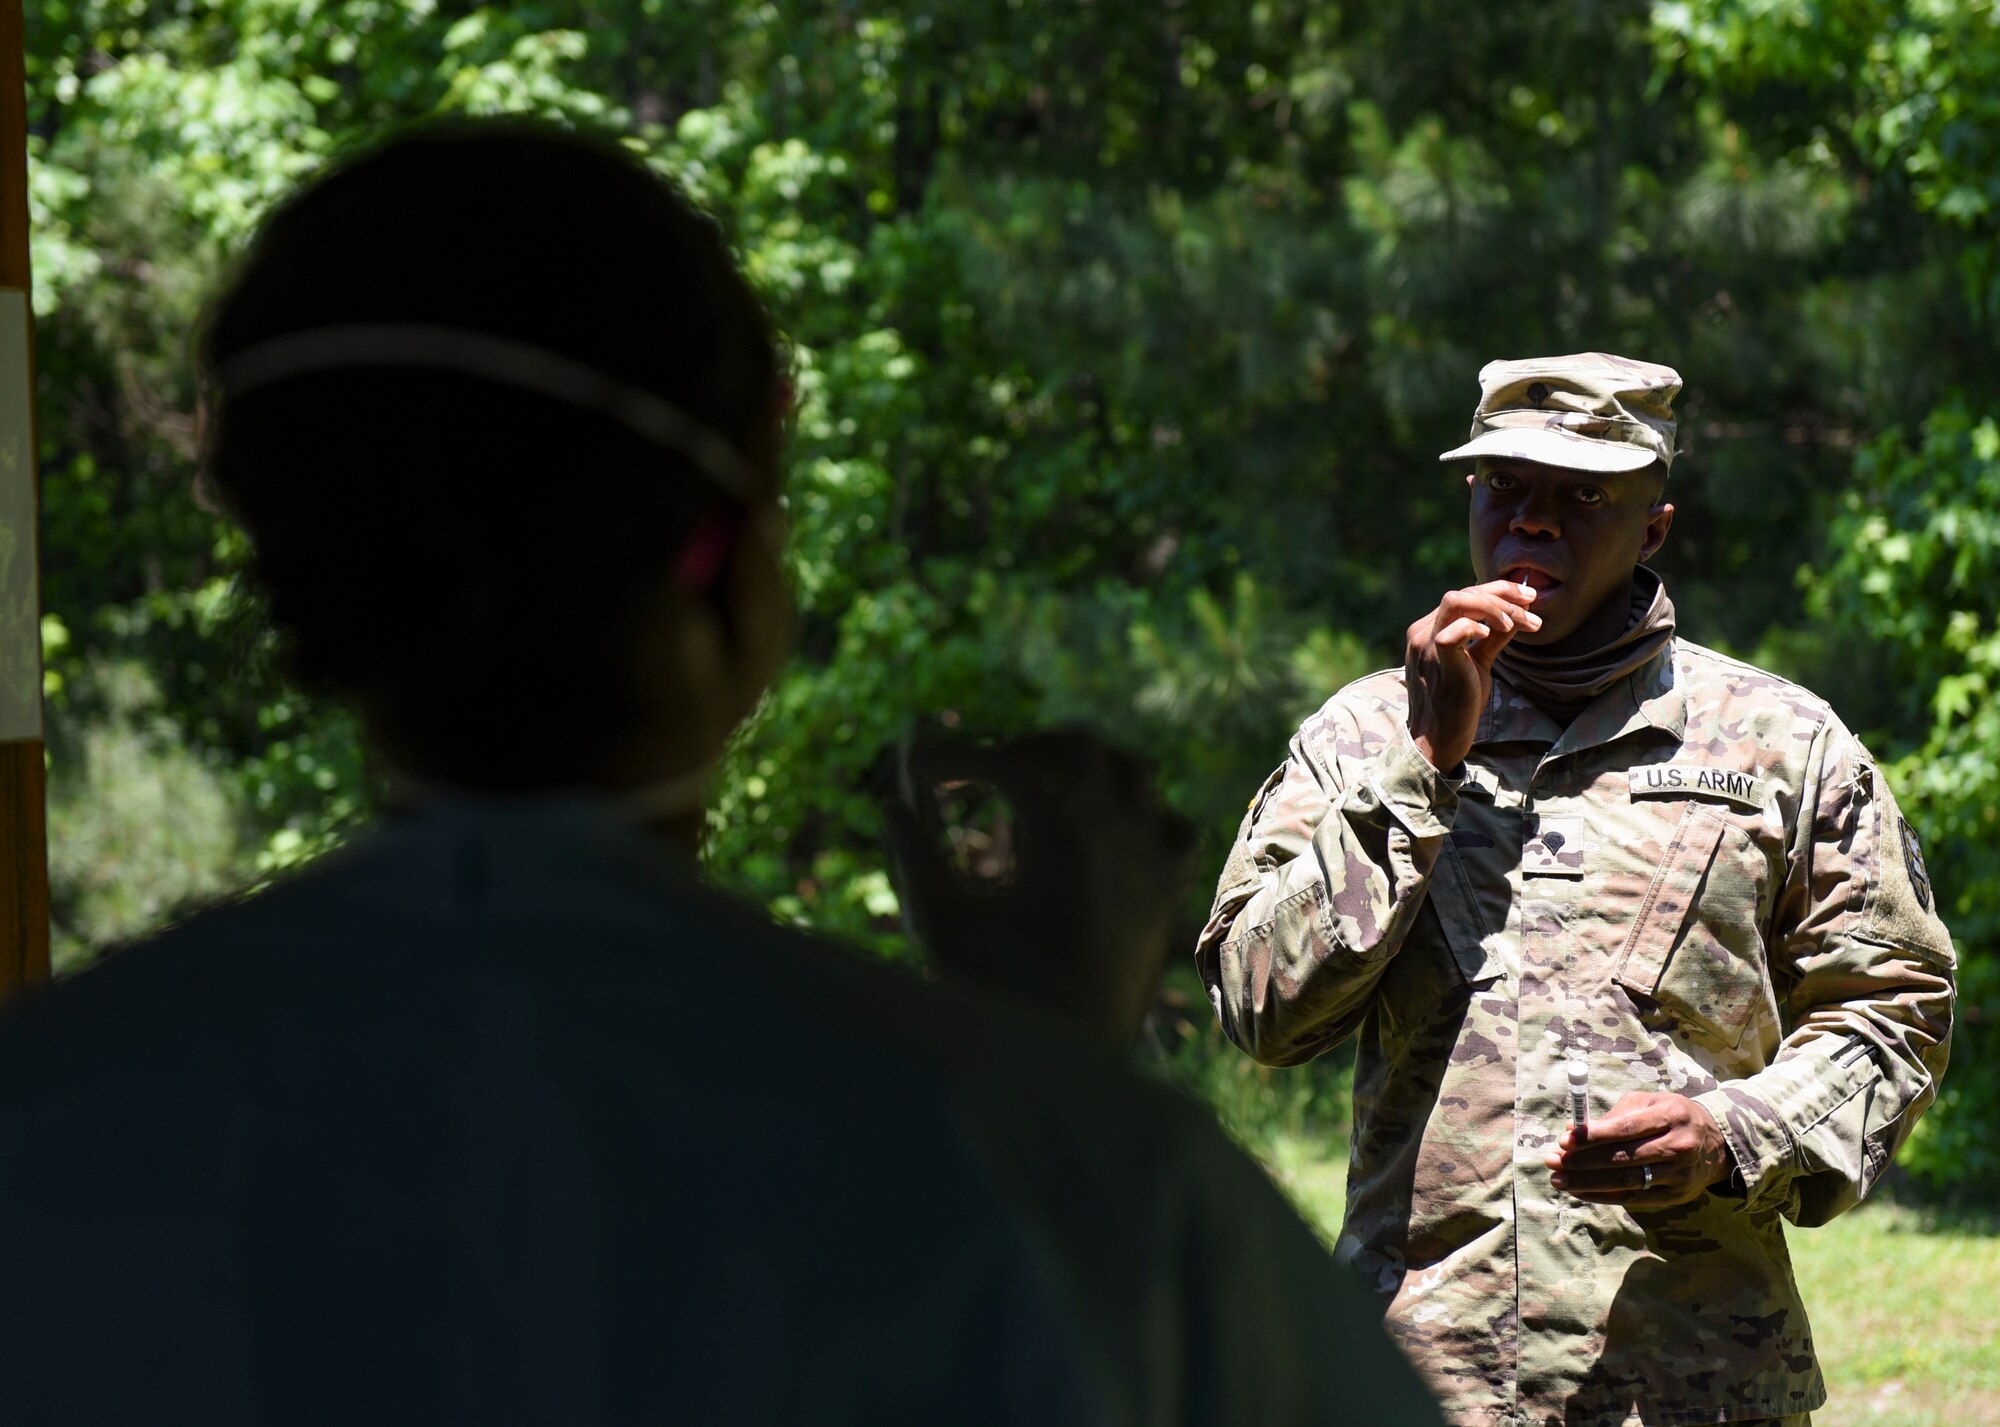 McDonald Army Health Center staff members conduct oral swab tests during a mass rapid COVID-19 testing at Joint Base Langley-Eustis, Virginia, June 3, 2020. The MCAHC members guided U.S. Army Soldiers through swab procedures while maintaining distance to ensure safe practices. (U.S. Air Force photo by Senior Airman Monica Roybal)